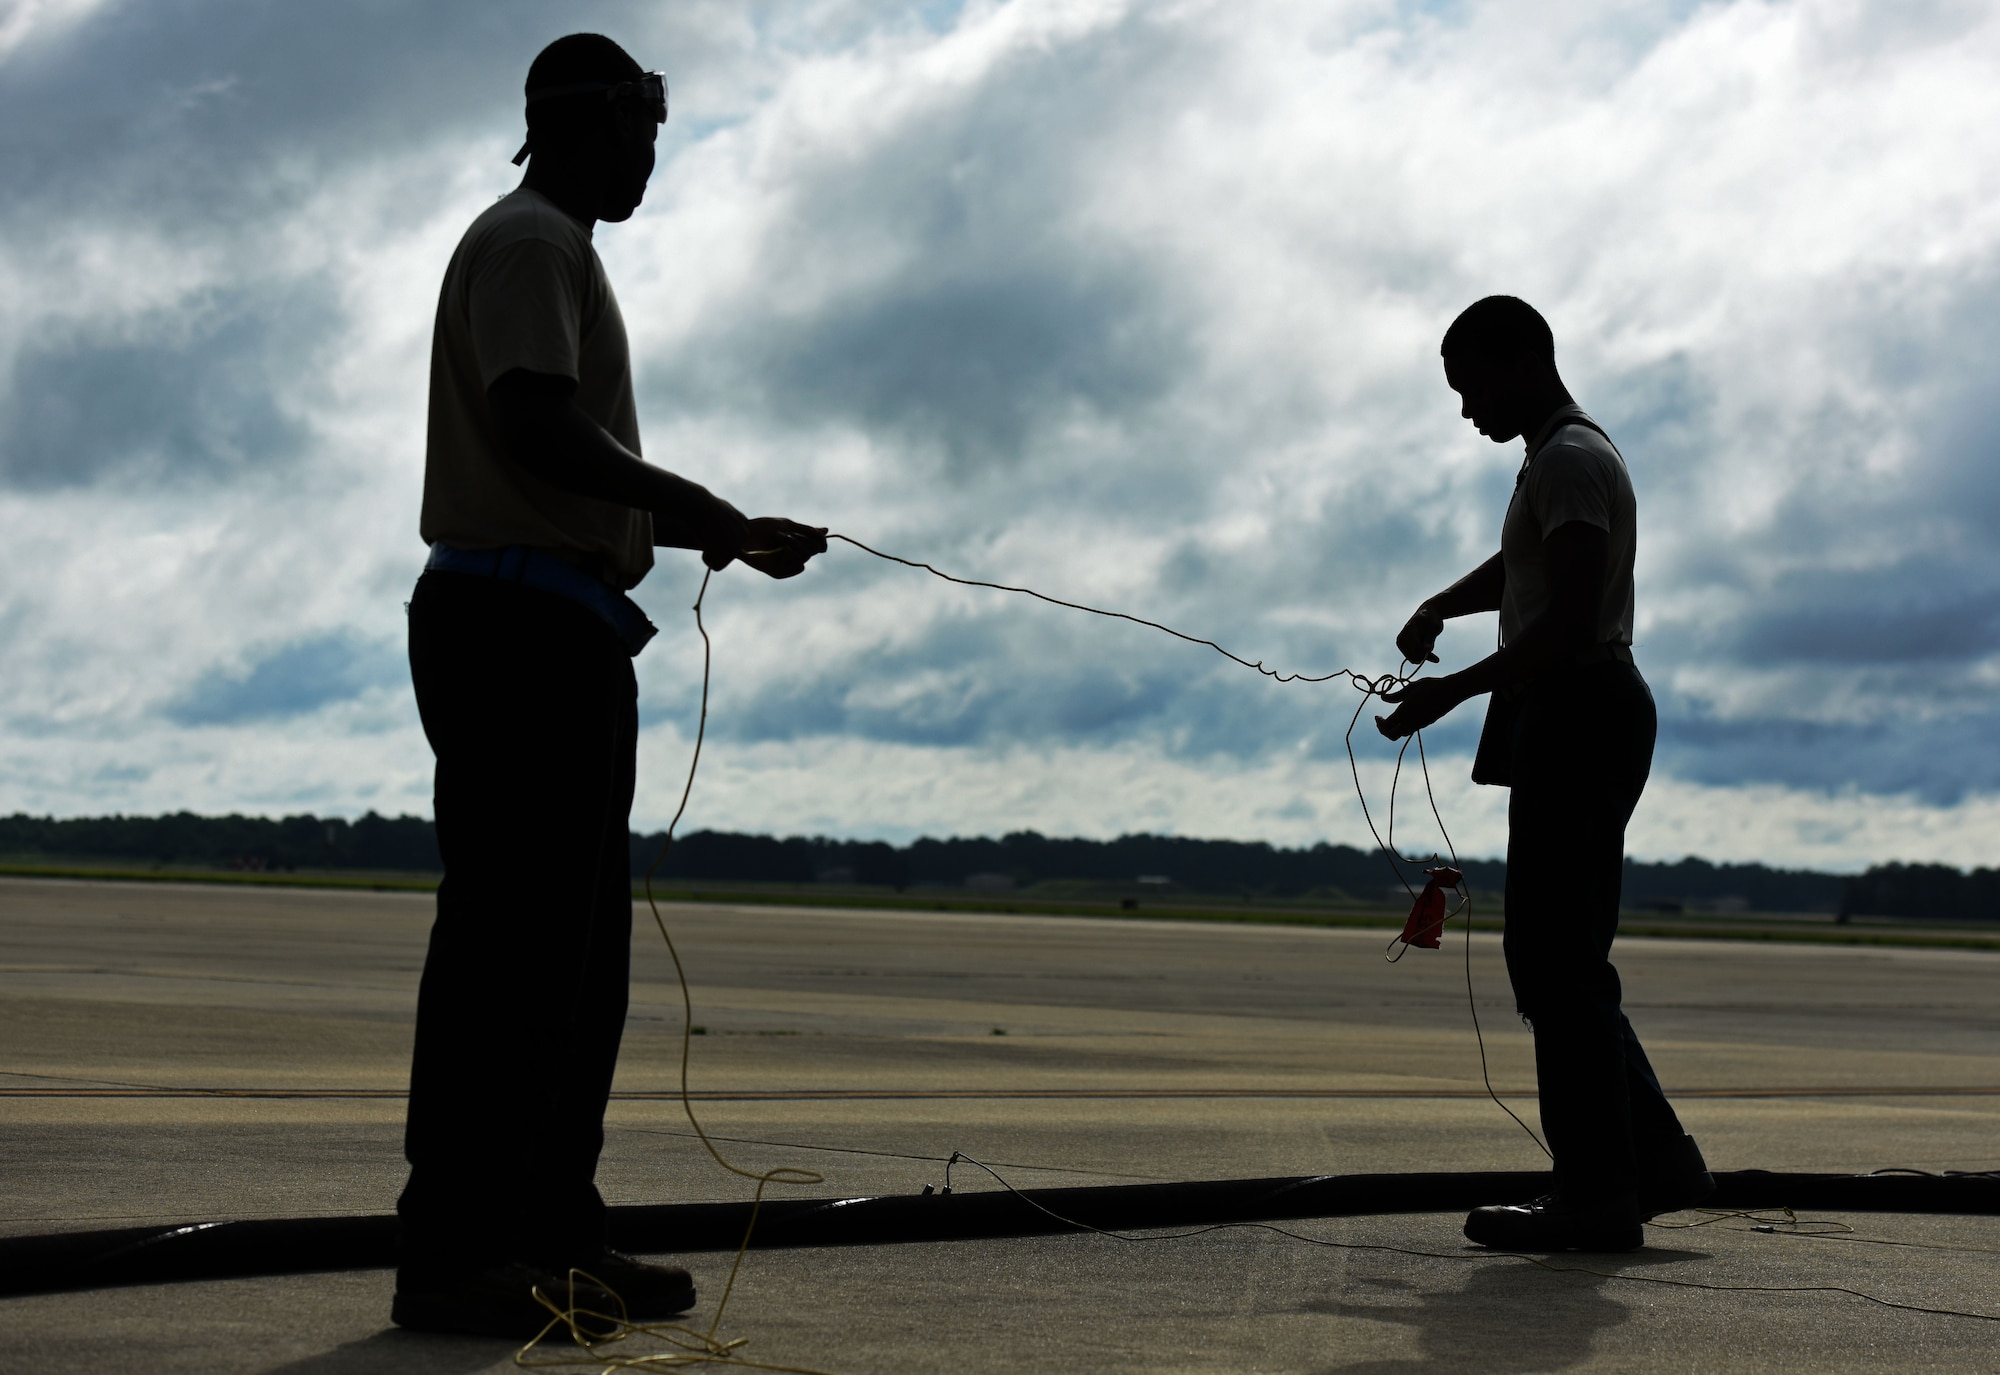 U.S. Air Force Airman 1st Class Joey Albright, left, and Staff Sgt. Jameson Holmes, 20th Aircraft Maintenance Squadron (AMXS) tactical aircraft maintainers, work together to untangle a cable at Shaw Air Force Base, S.C., June 26, 2018.